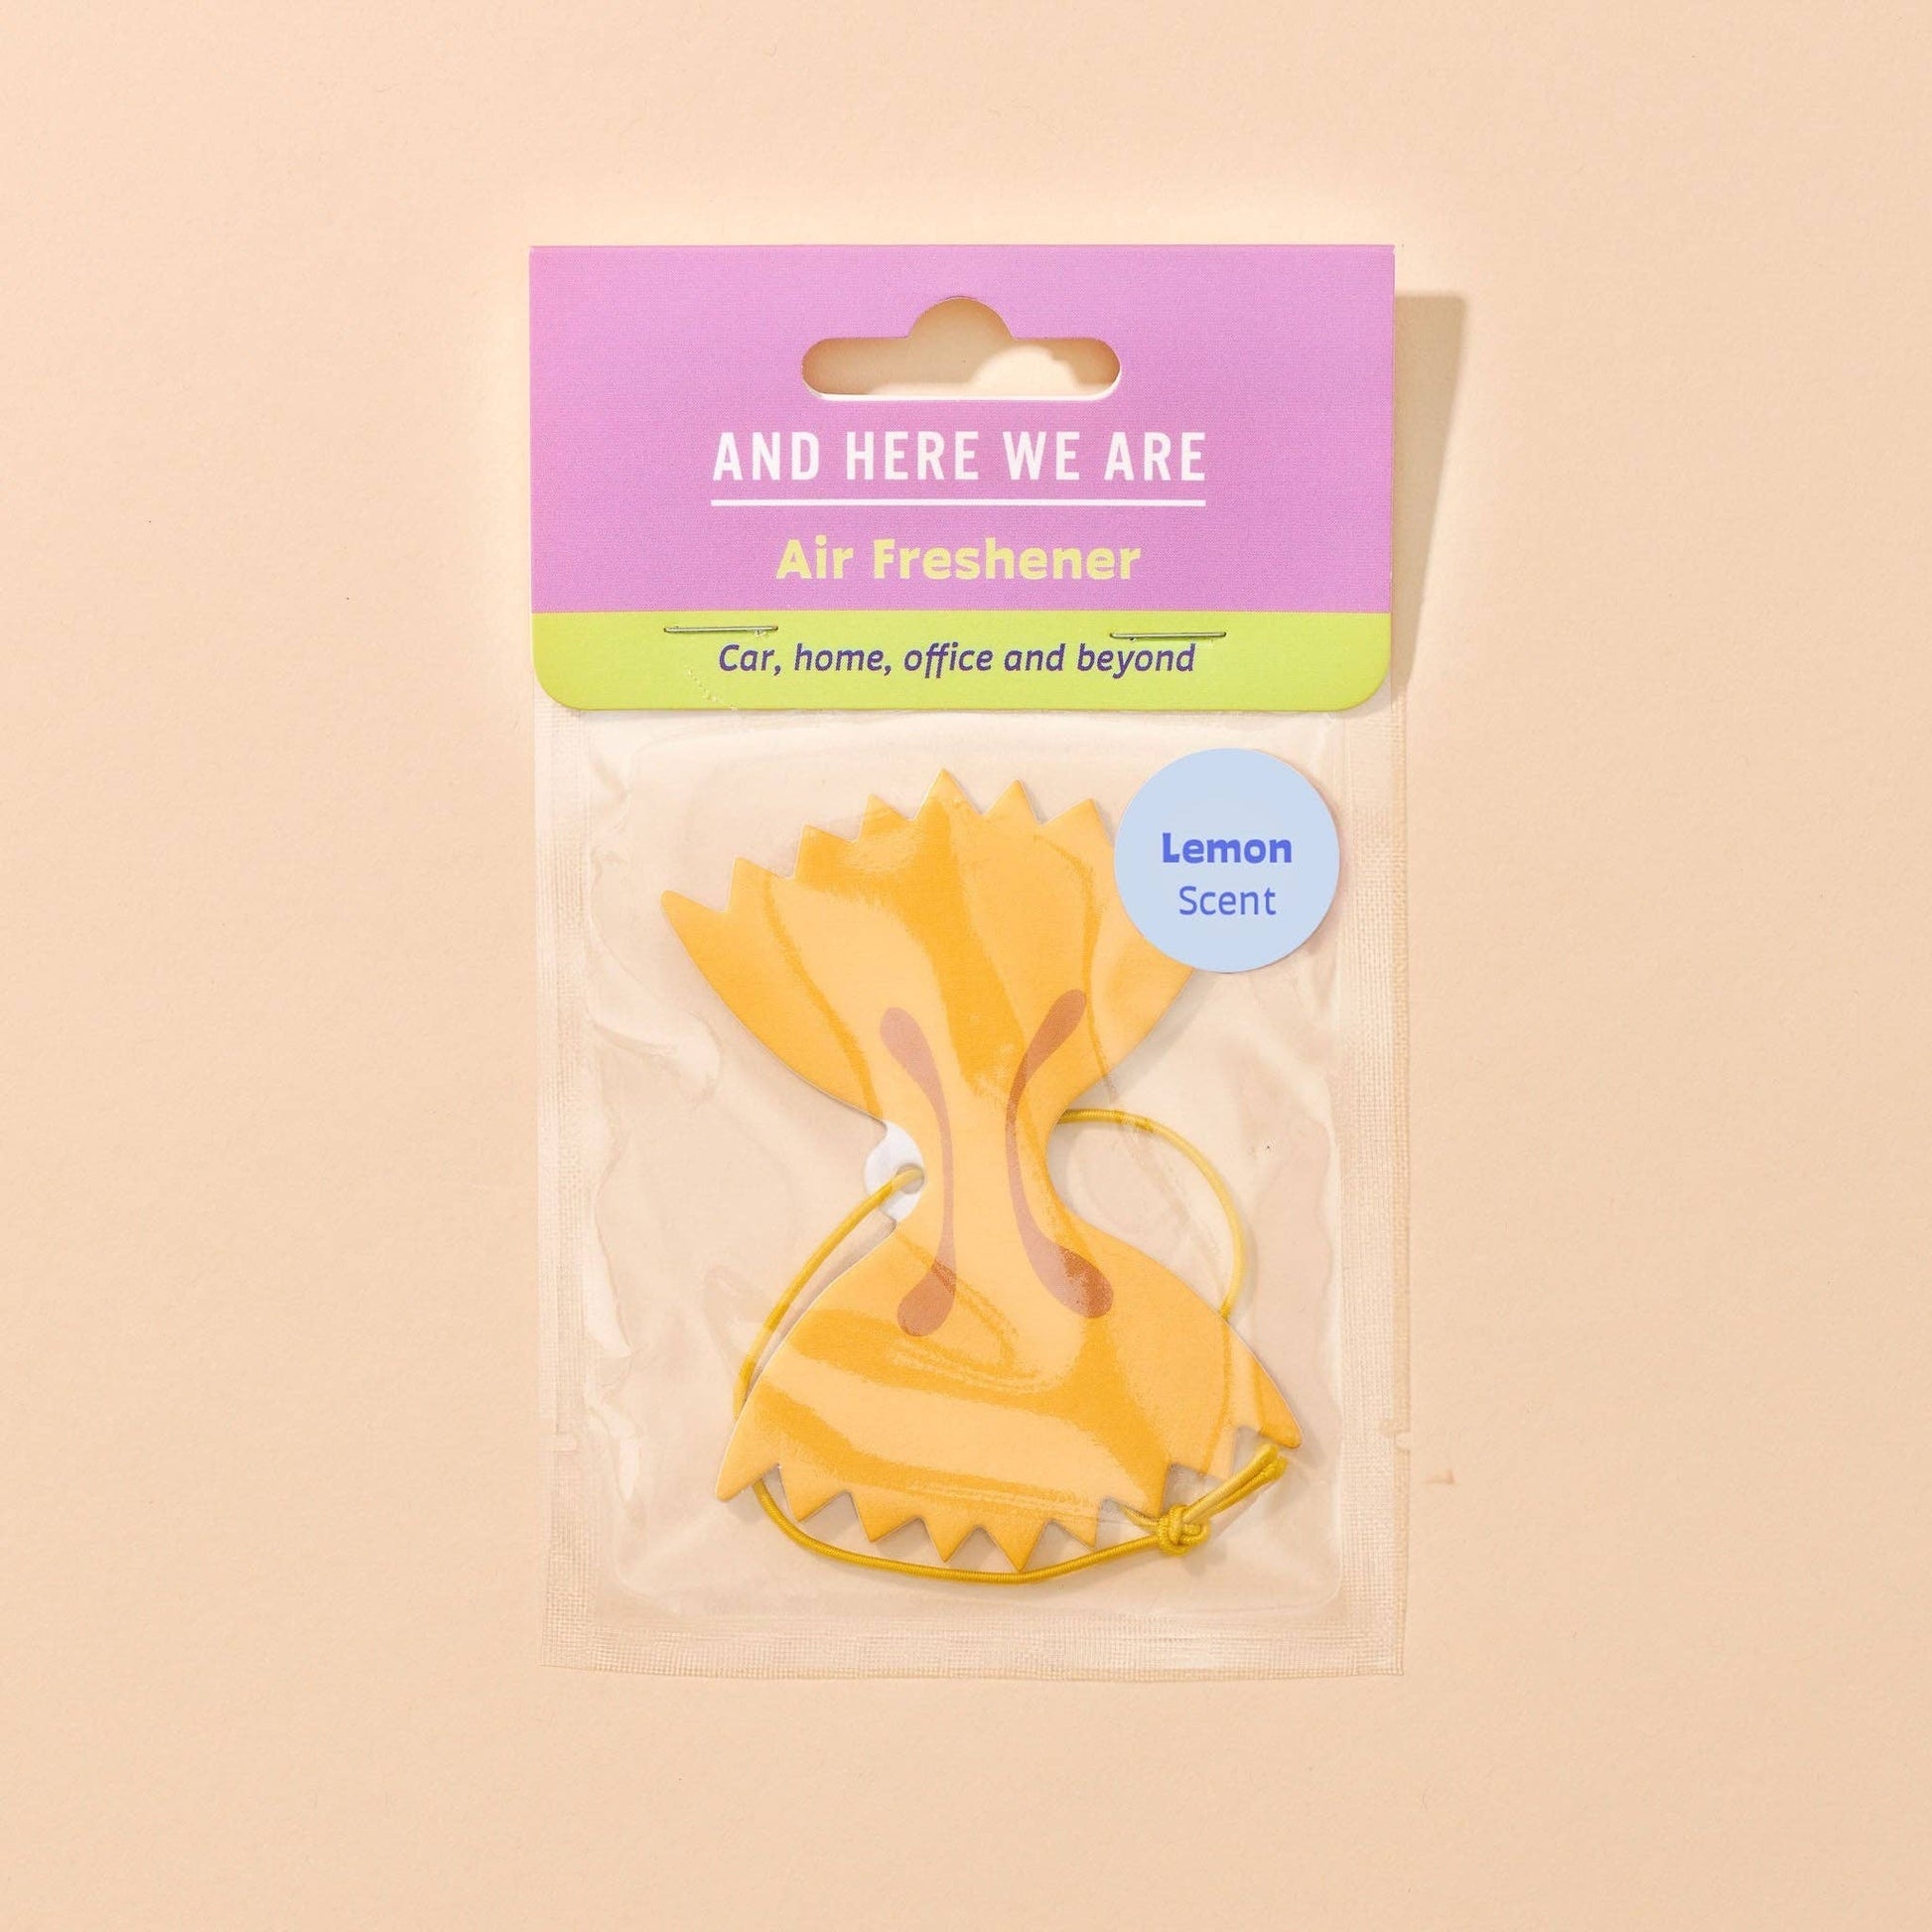 Car air freshener made to look like farfalle (bowtie) pasta in packaging 